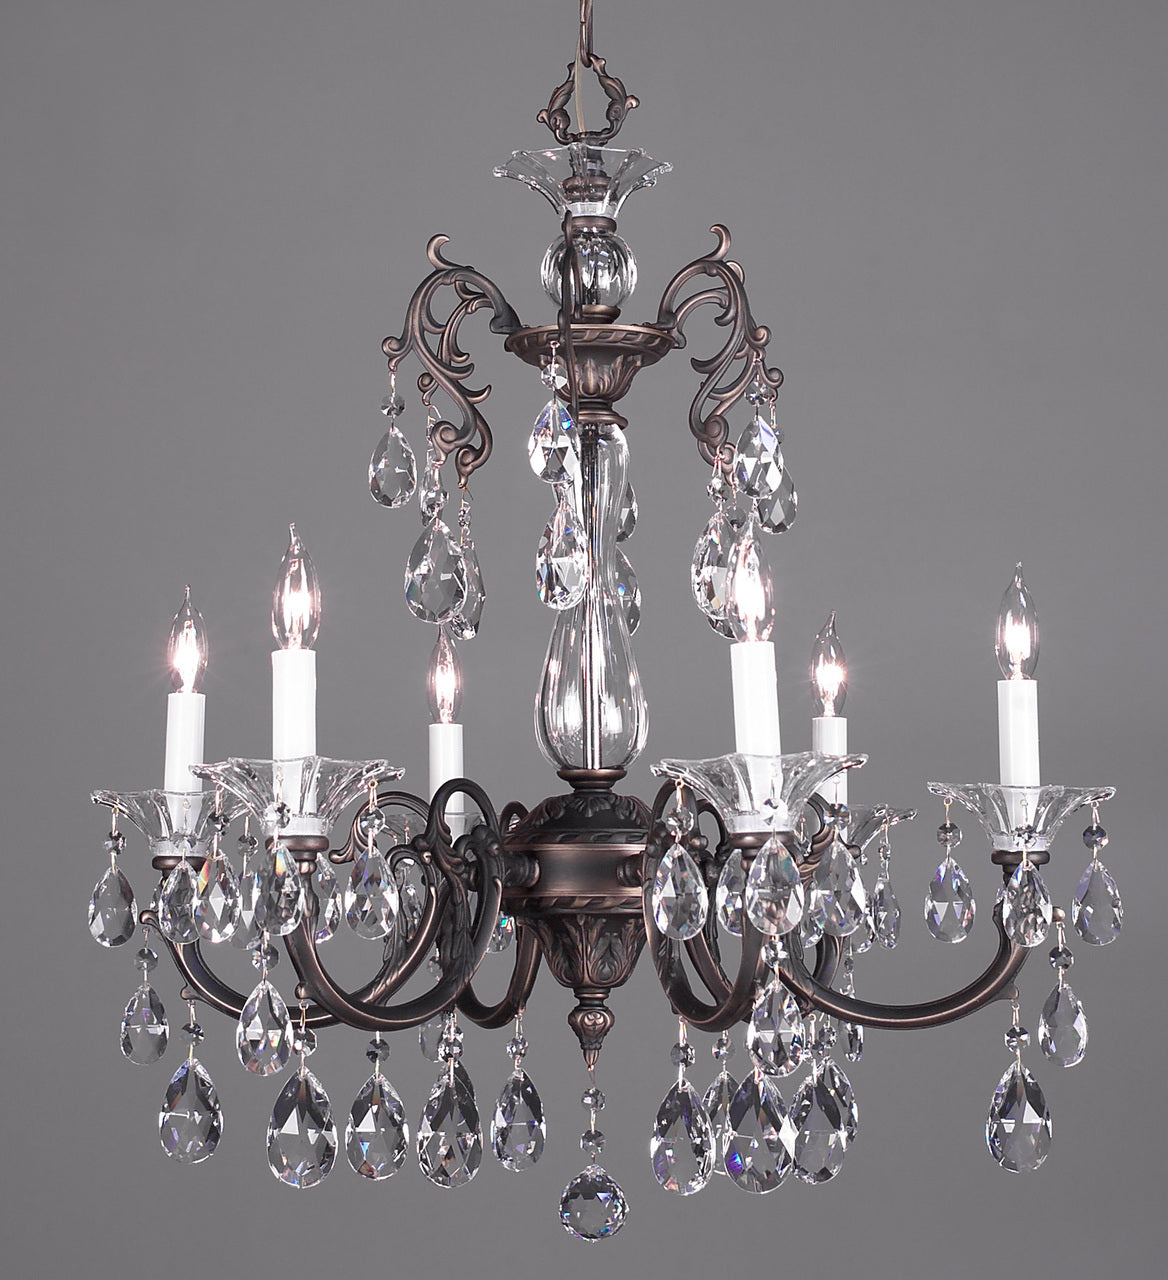 Classic Lighting 57056 SS SC Via Lombardi Crystal Chandelier in Silverstone (Imported from Spain)